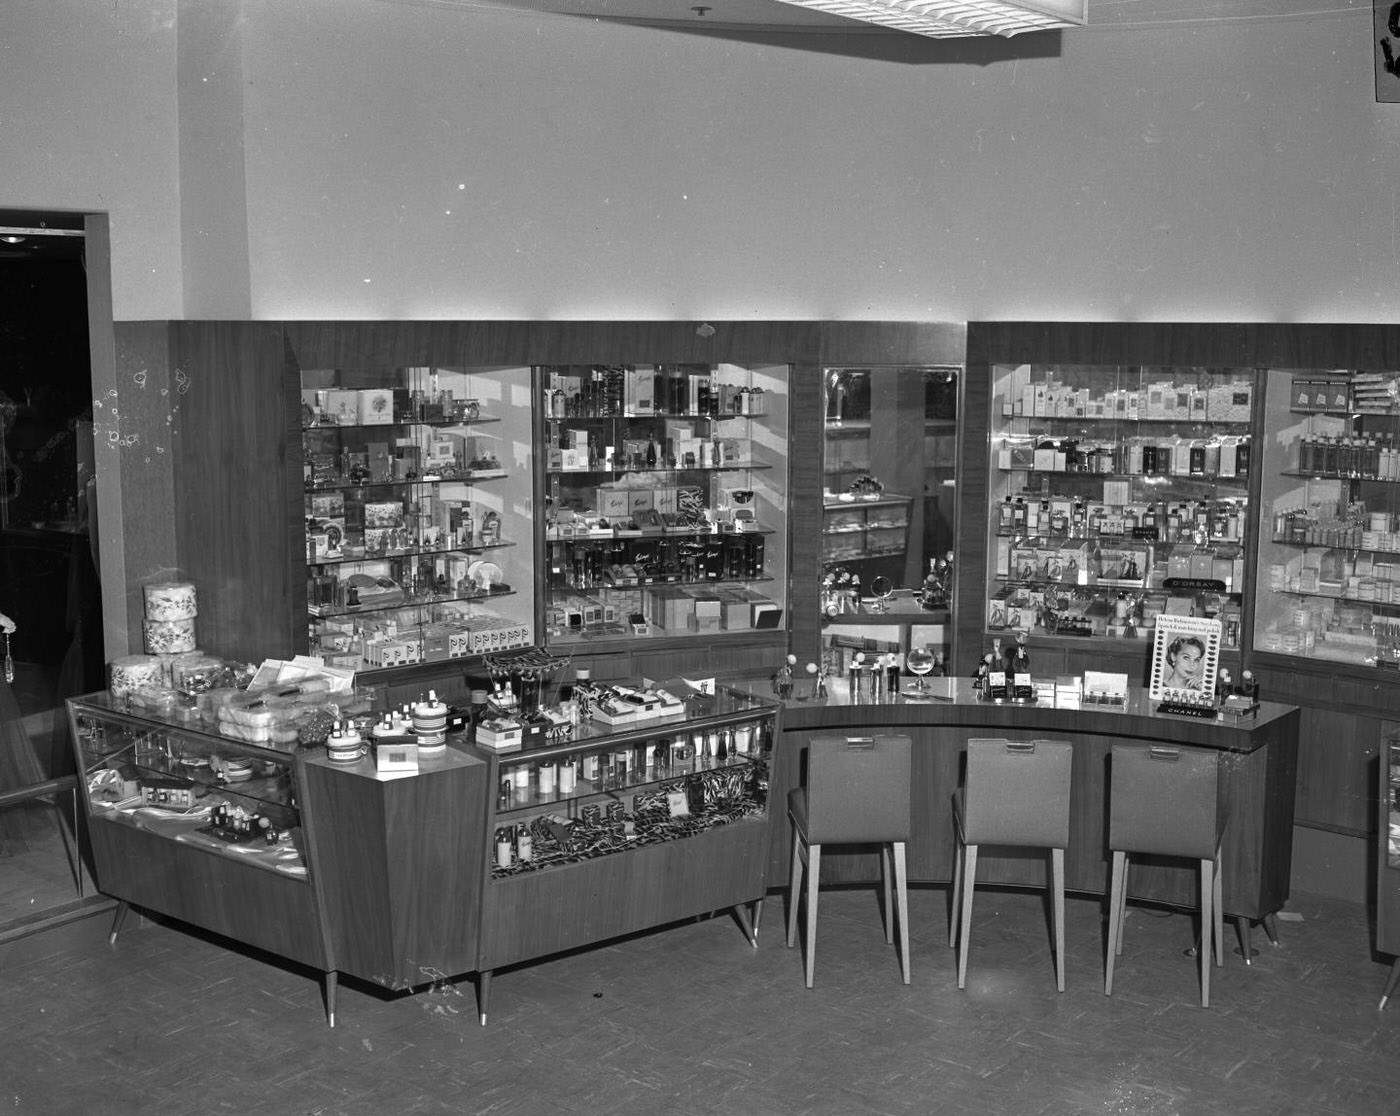 Yarings Cosmetic Counter with Perfume and Makeup Displays, 1951.